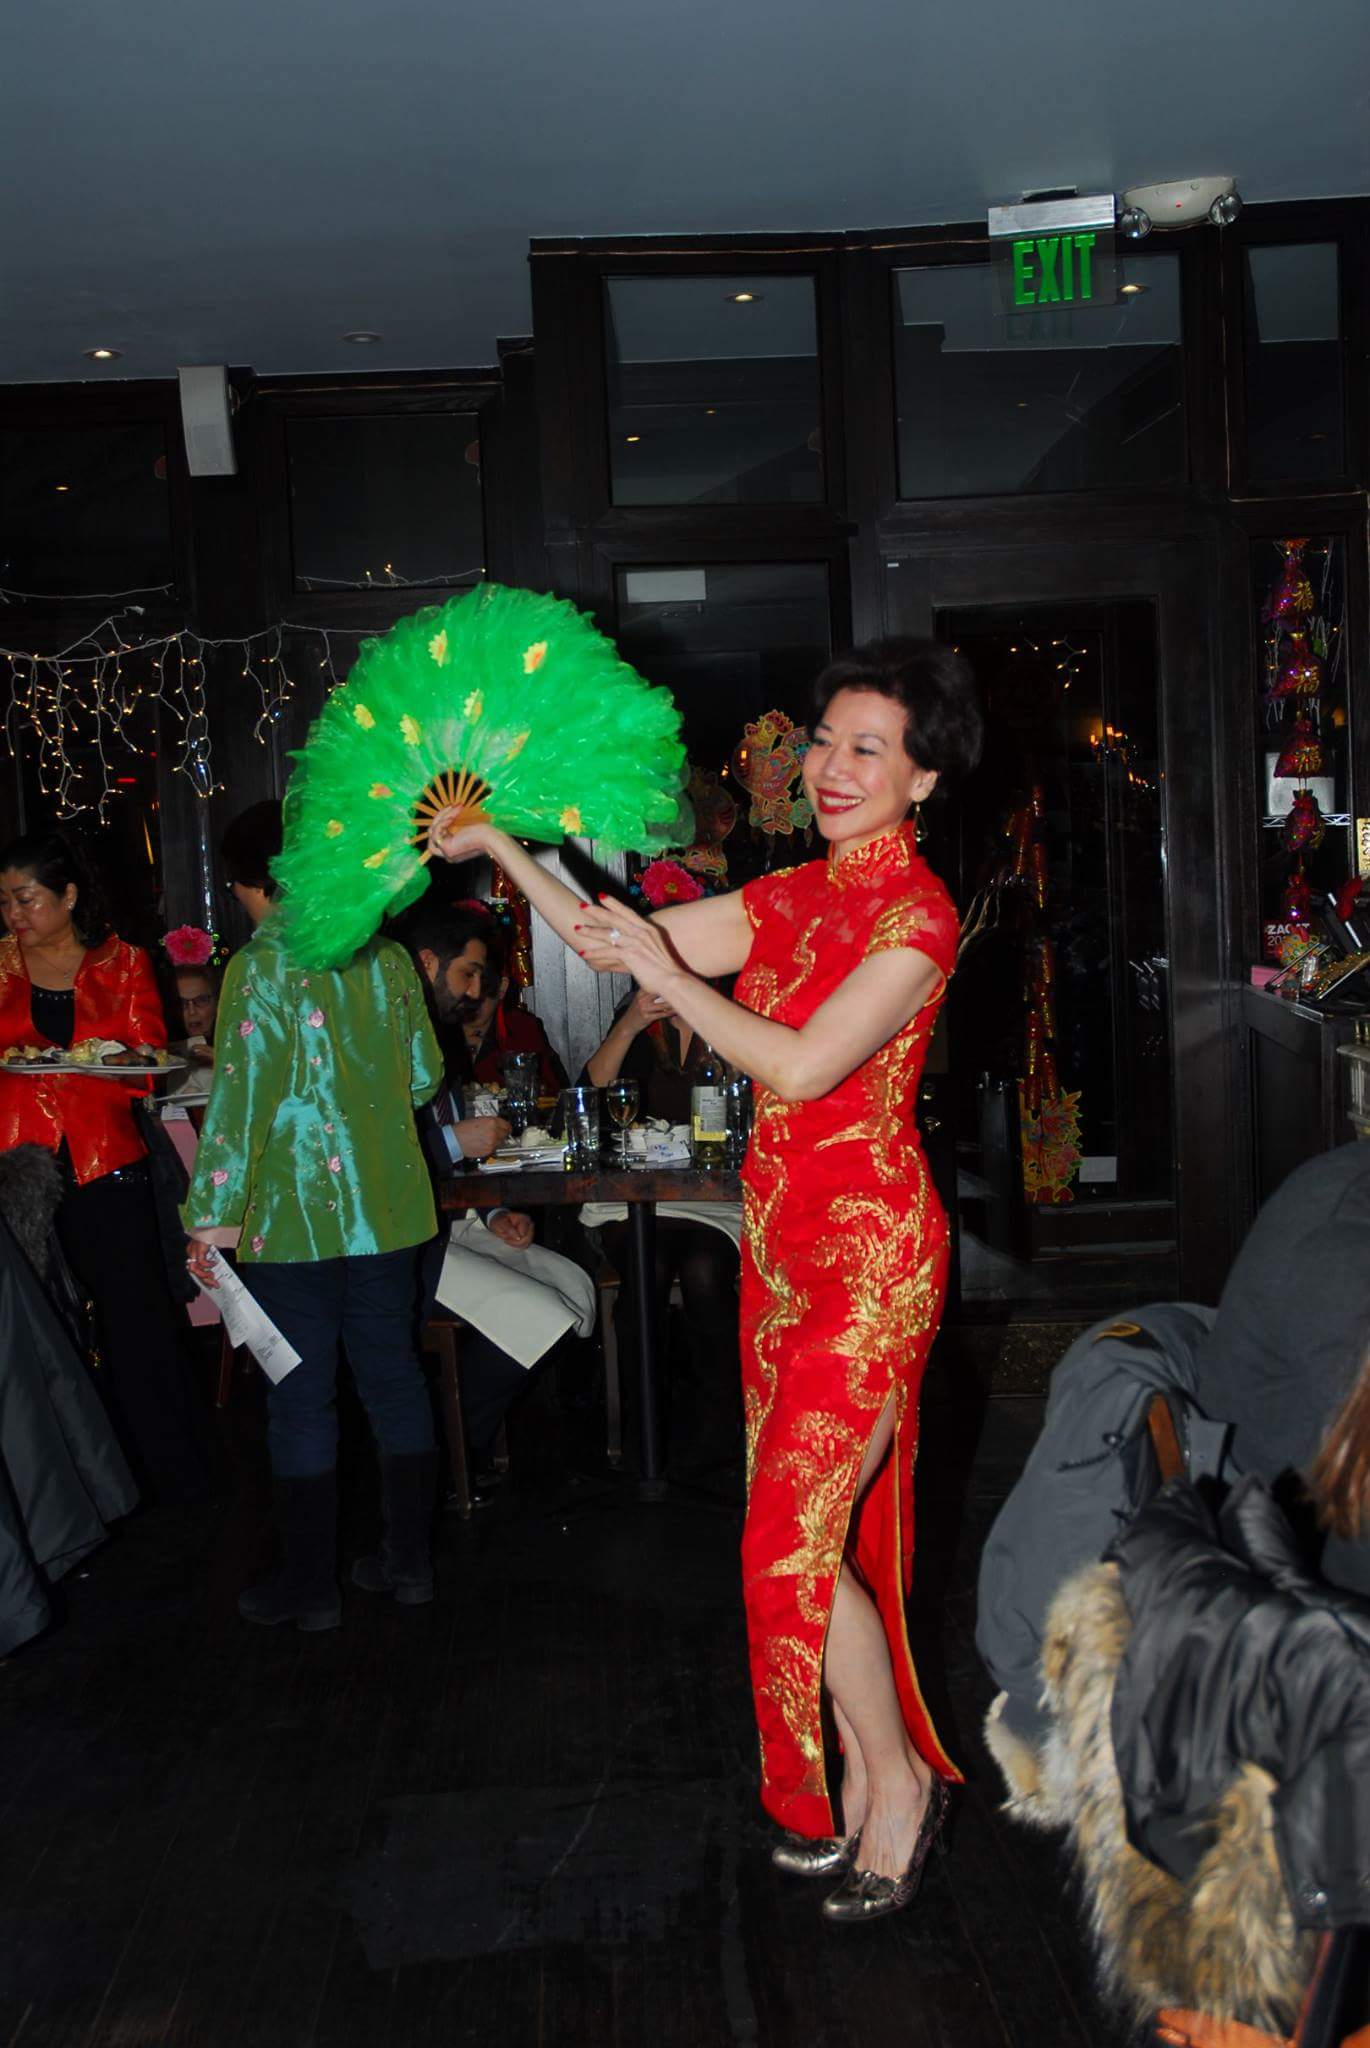 Owner Nancy Lee celebrating Chinese New Year in 2015 at Pig Heaven